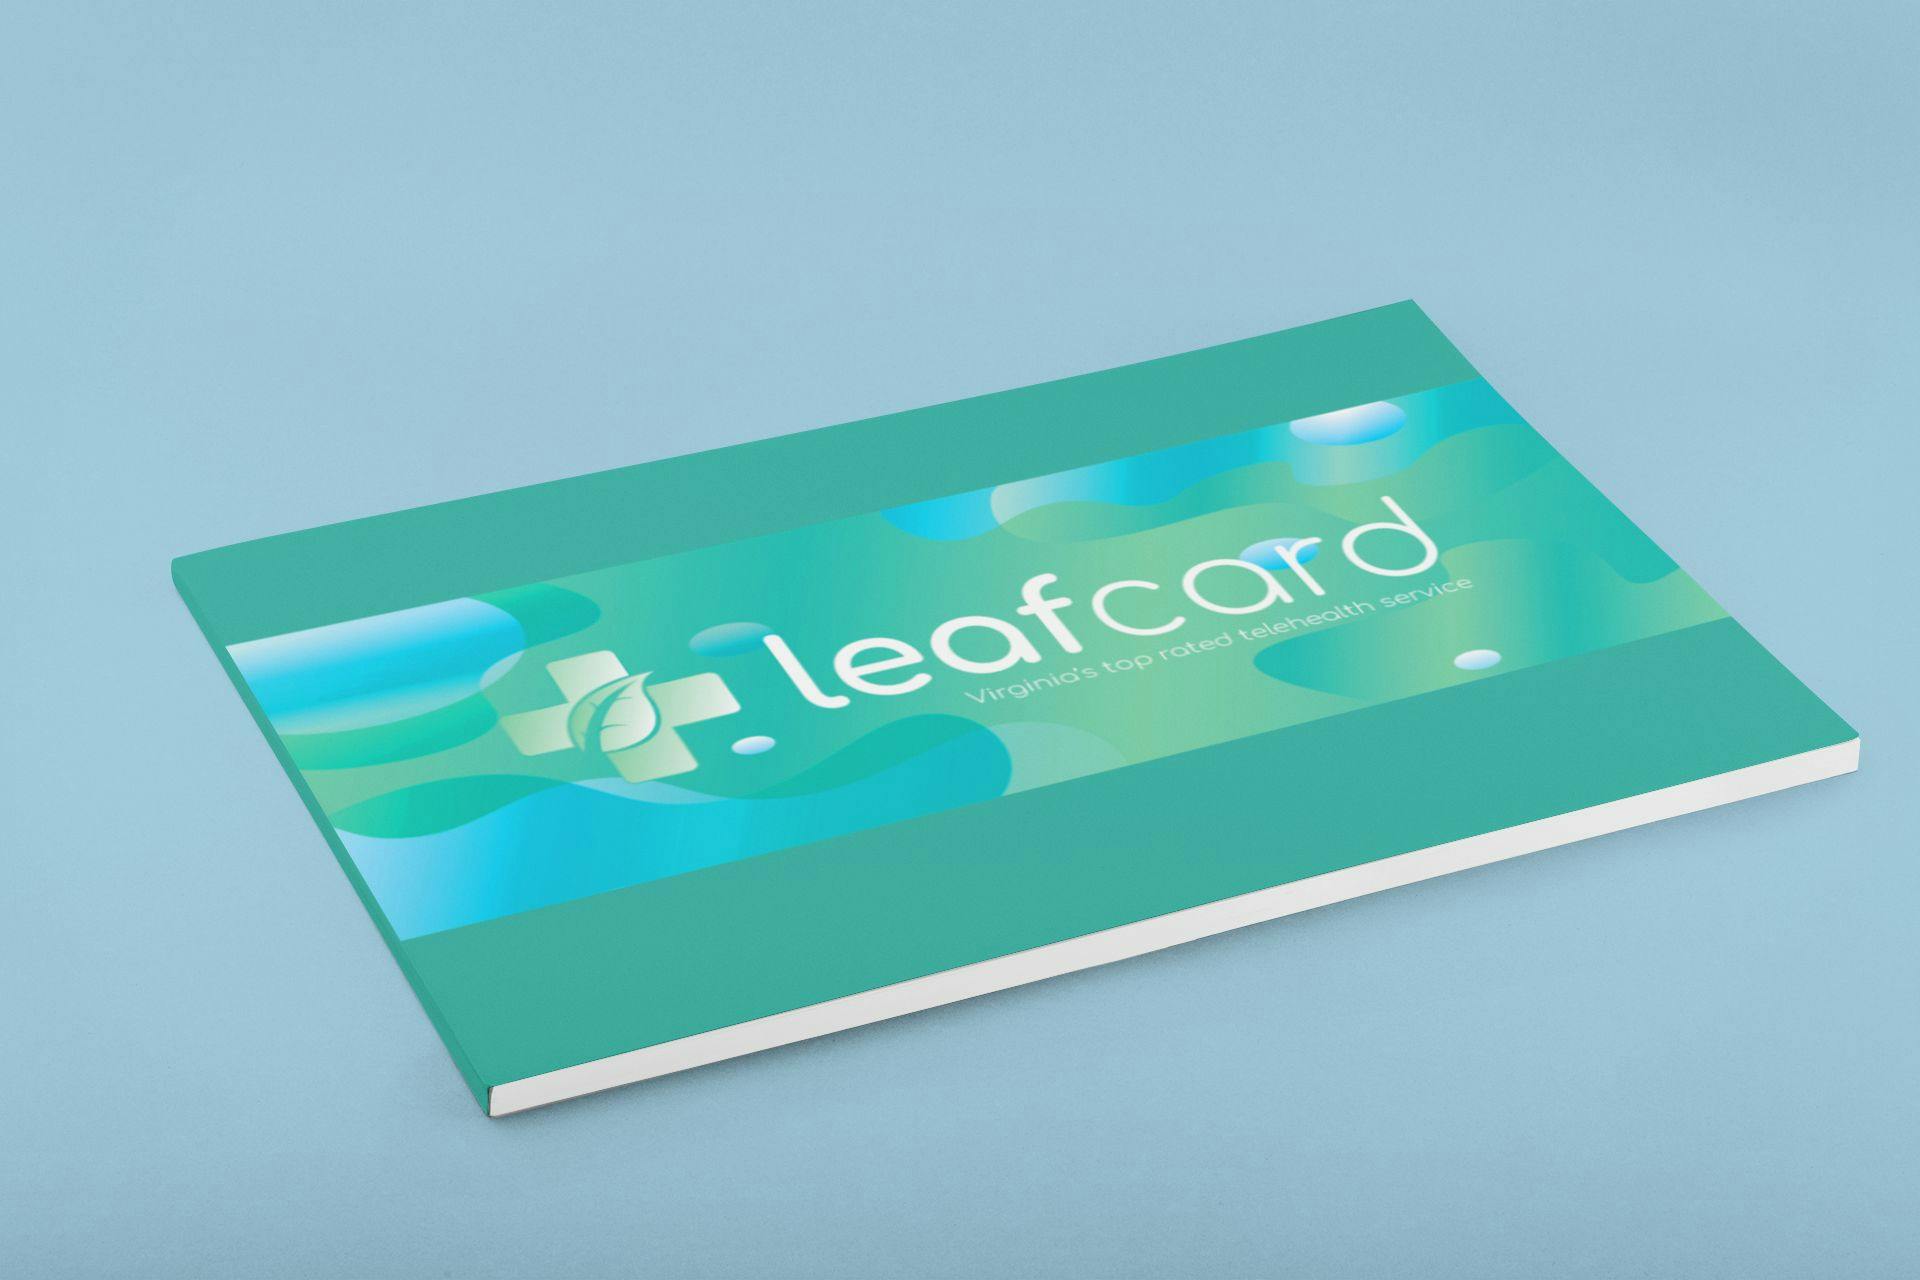 featured image - How the Leafcard Cannatech Platform Helps Patients and Provides Educational Materials